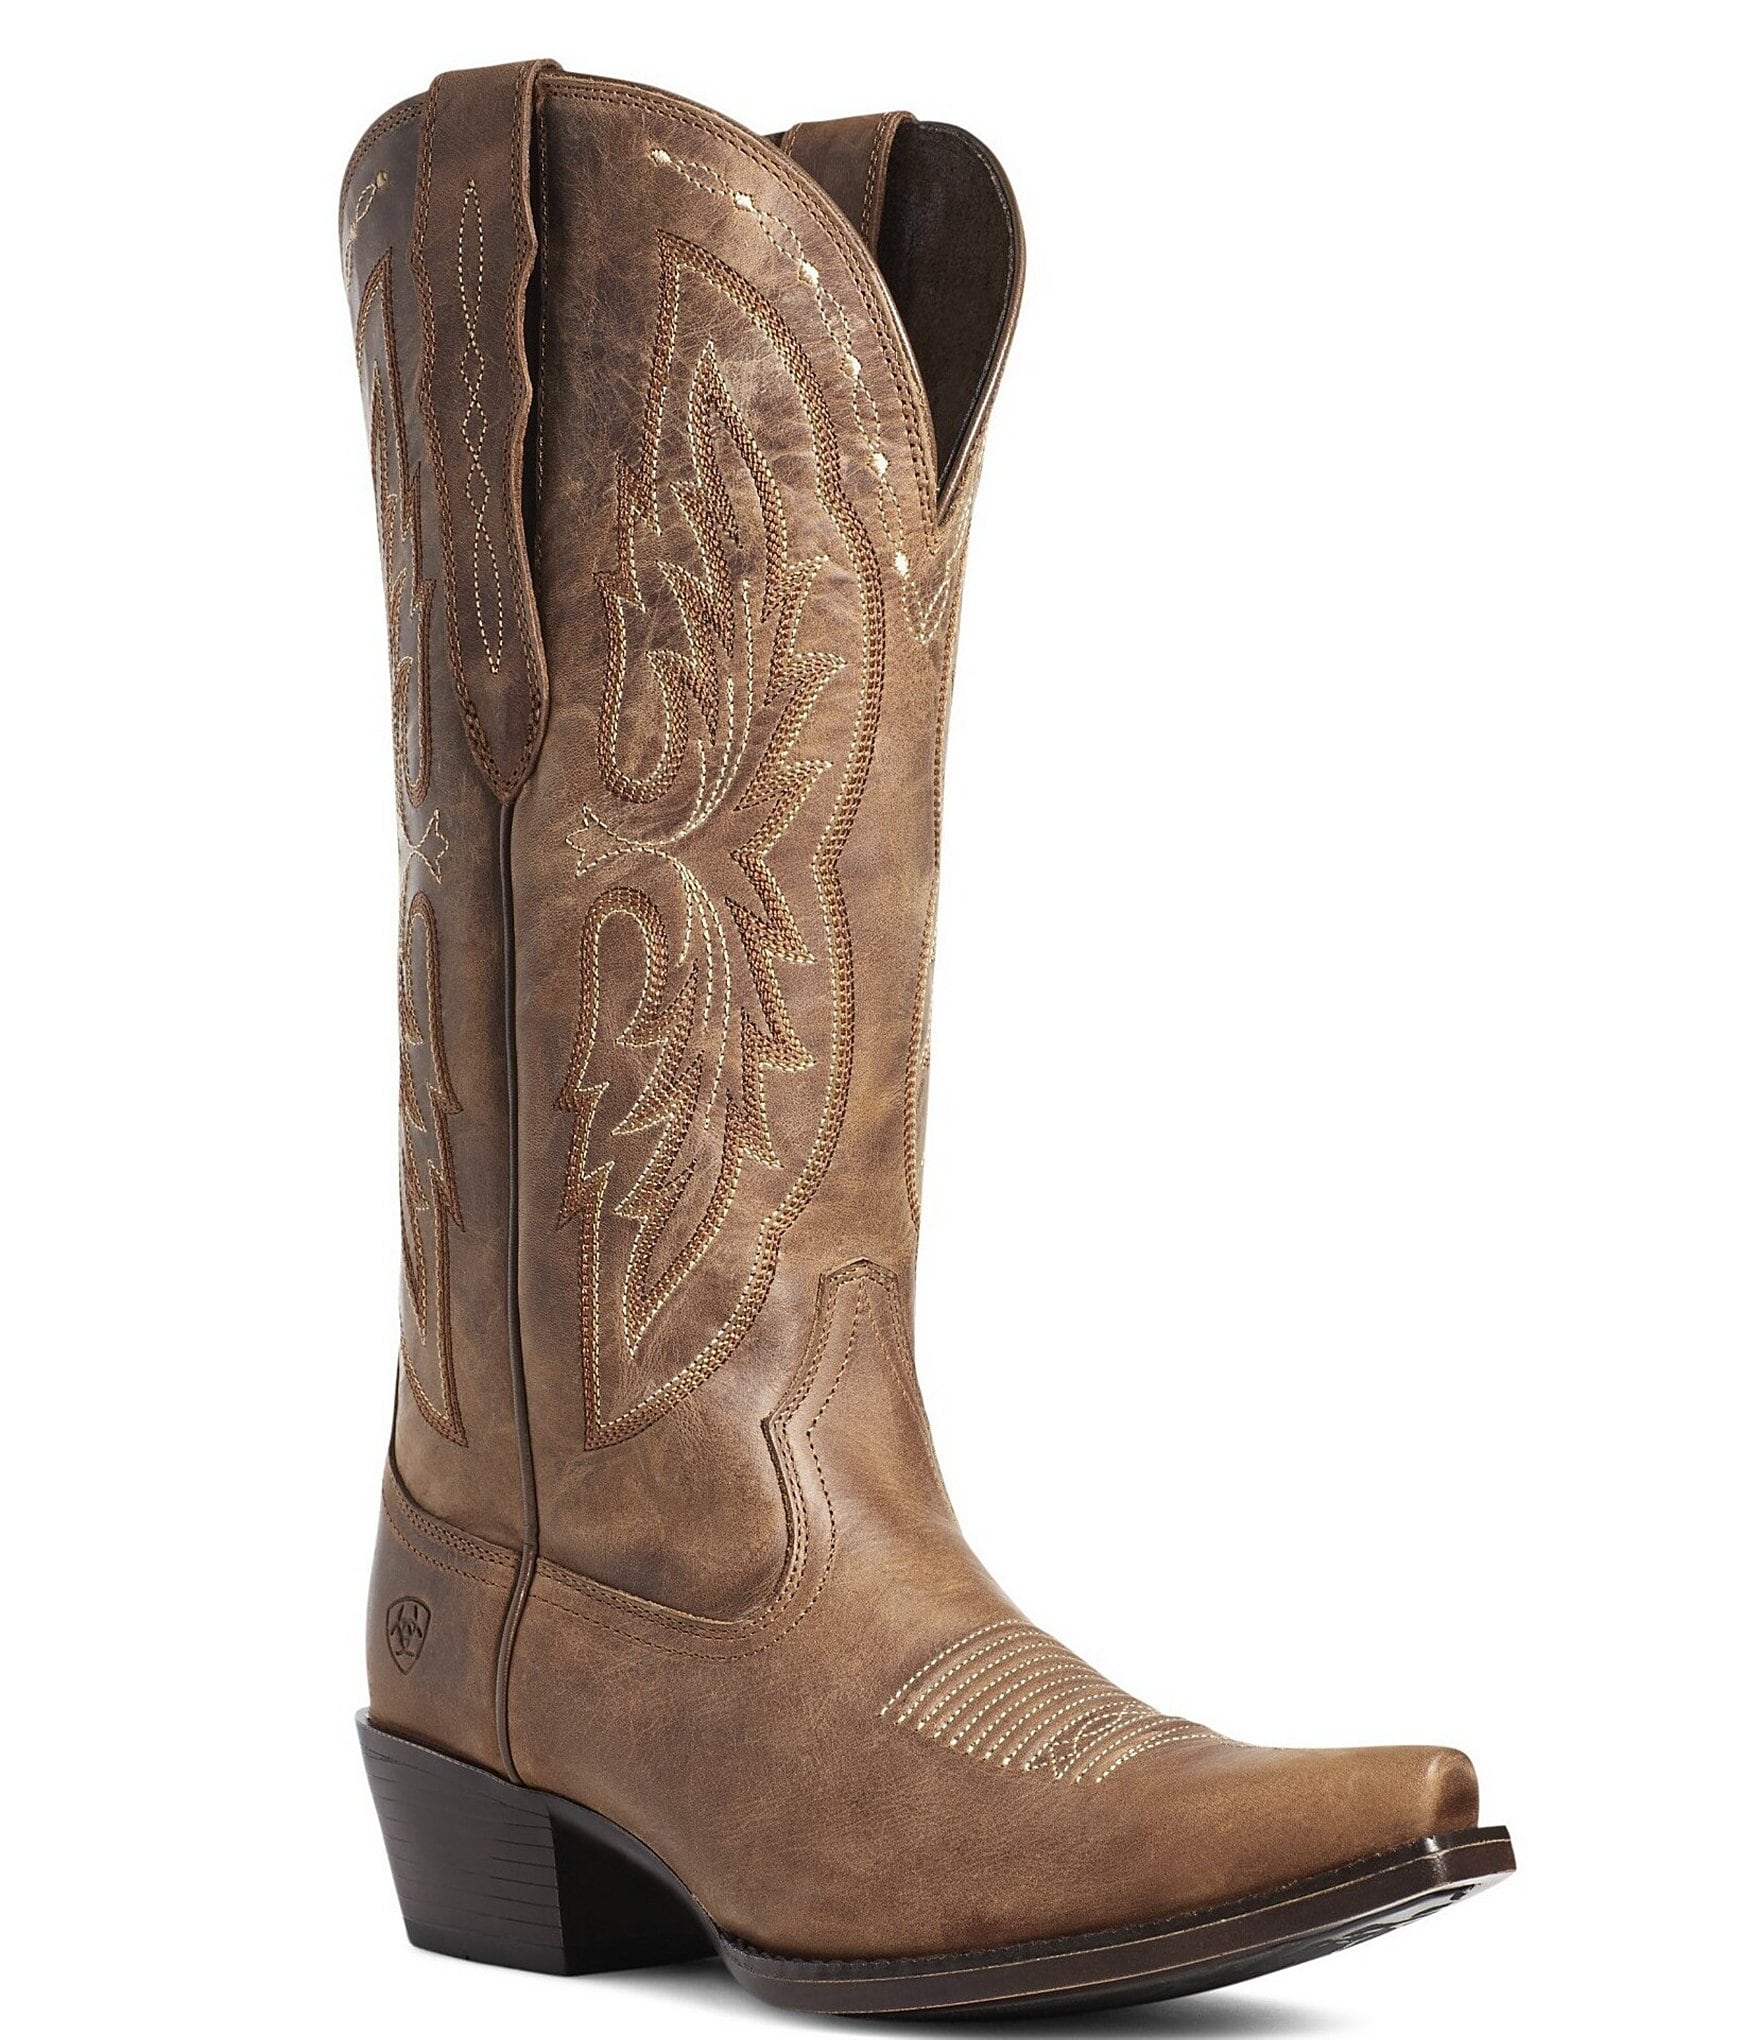 Ariat Women's Heritage X Toe Electric Wide Calf Tall Western Boots